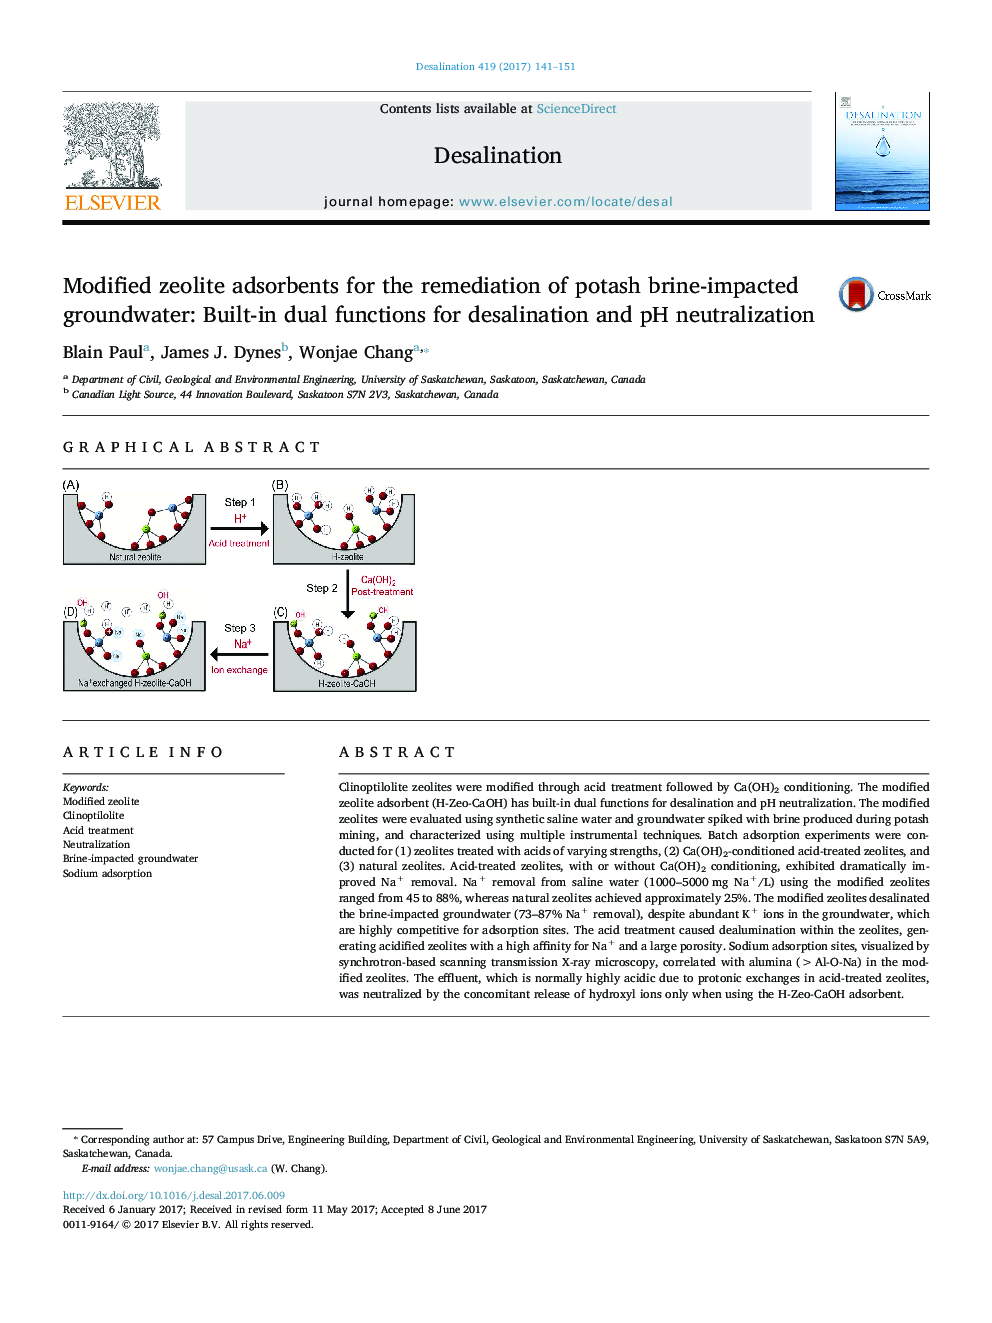 Modified zeolite adsorbents for the remediation of potash brine-impacted groundwater: Built-in dual functions for desalination and pH neutralization